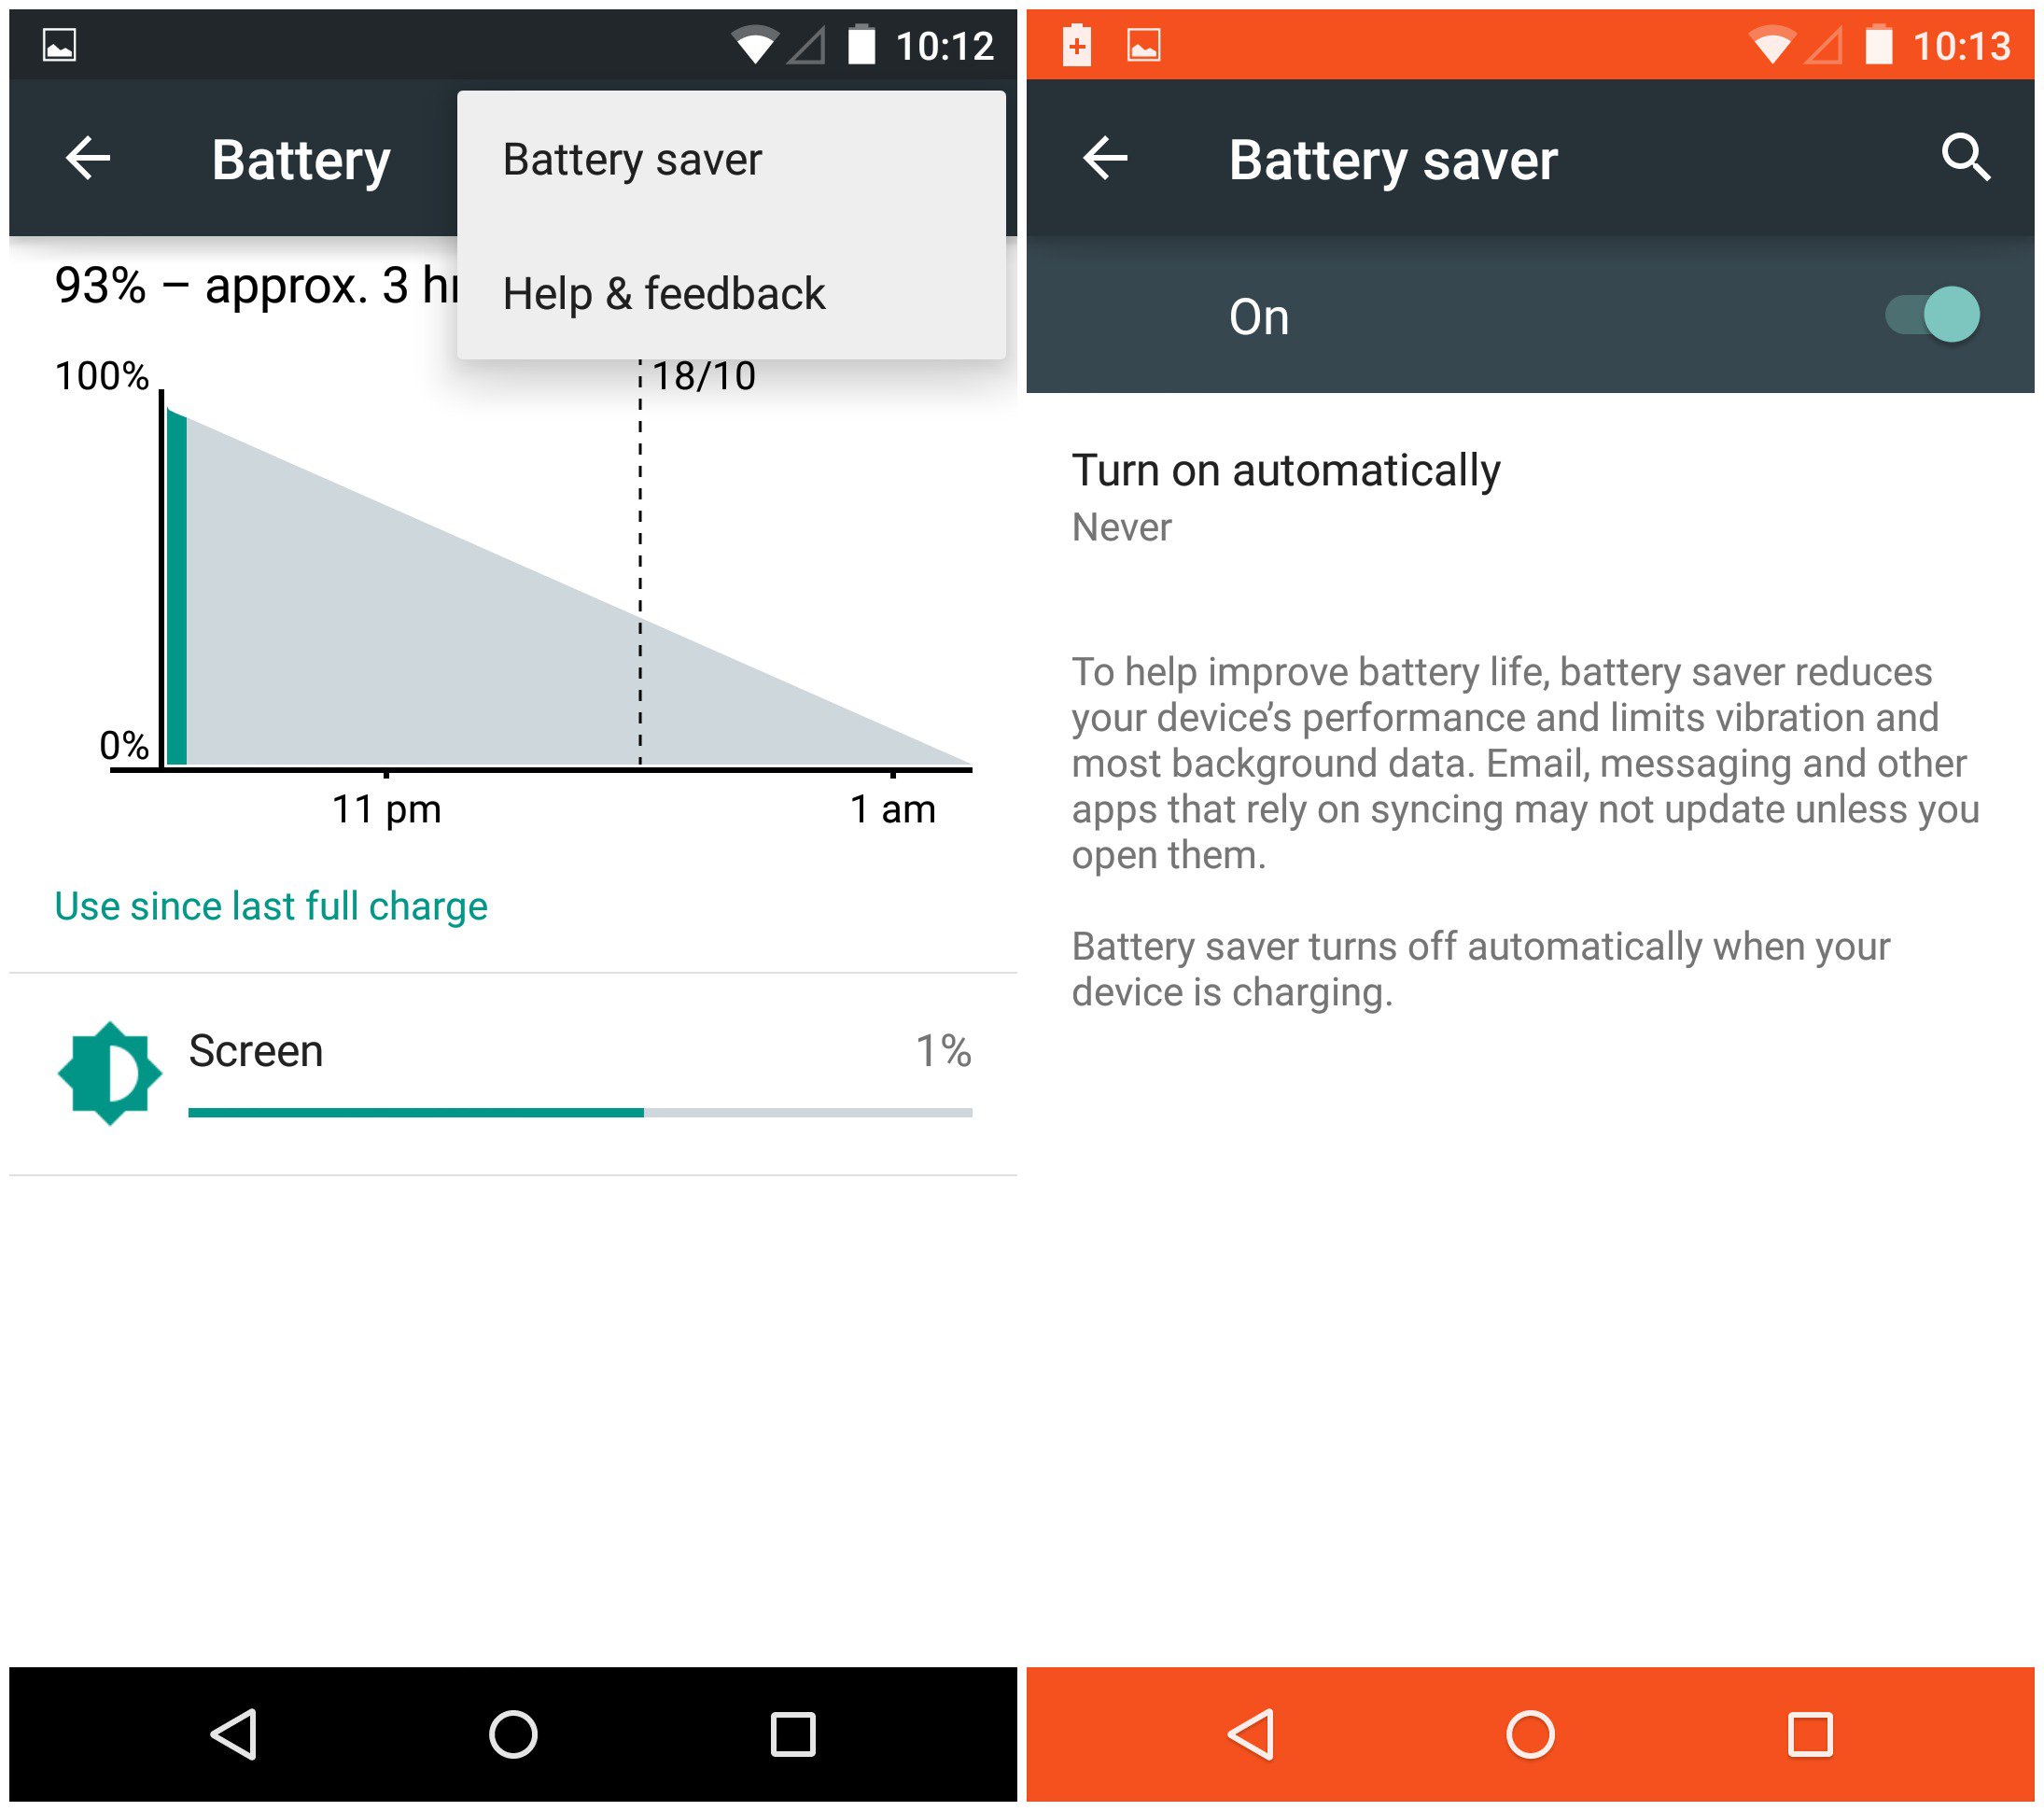 How To Use Battery Saver On Android 5.0 Lollipop